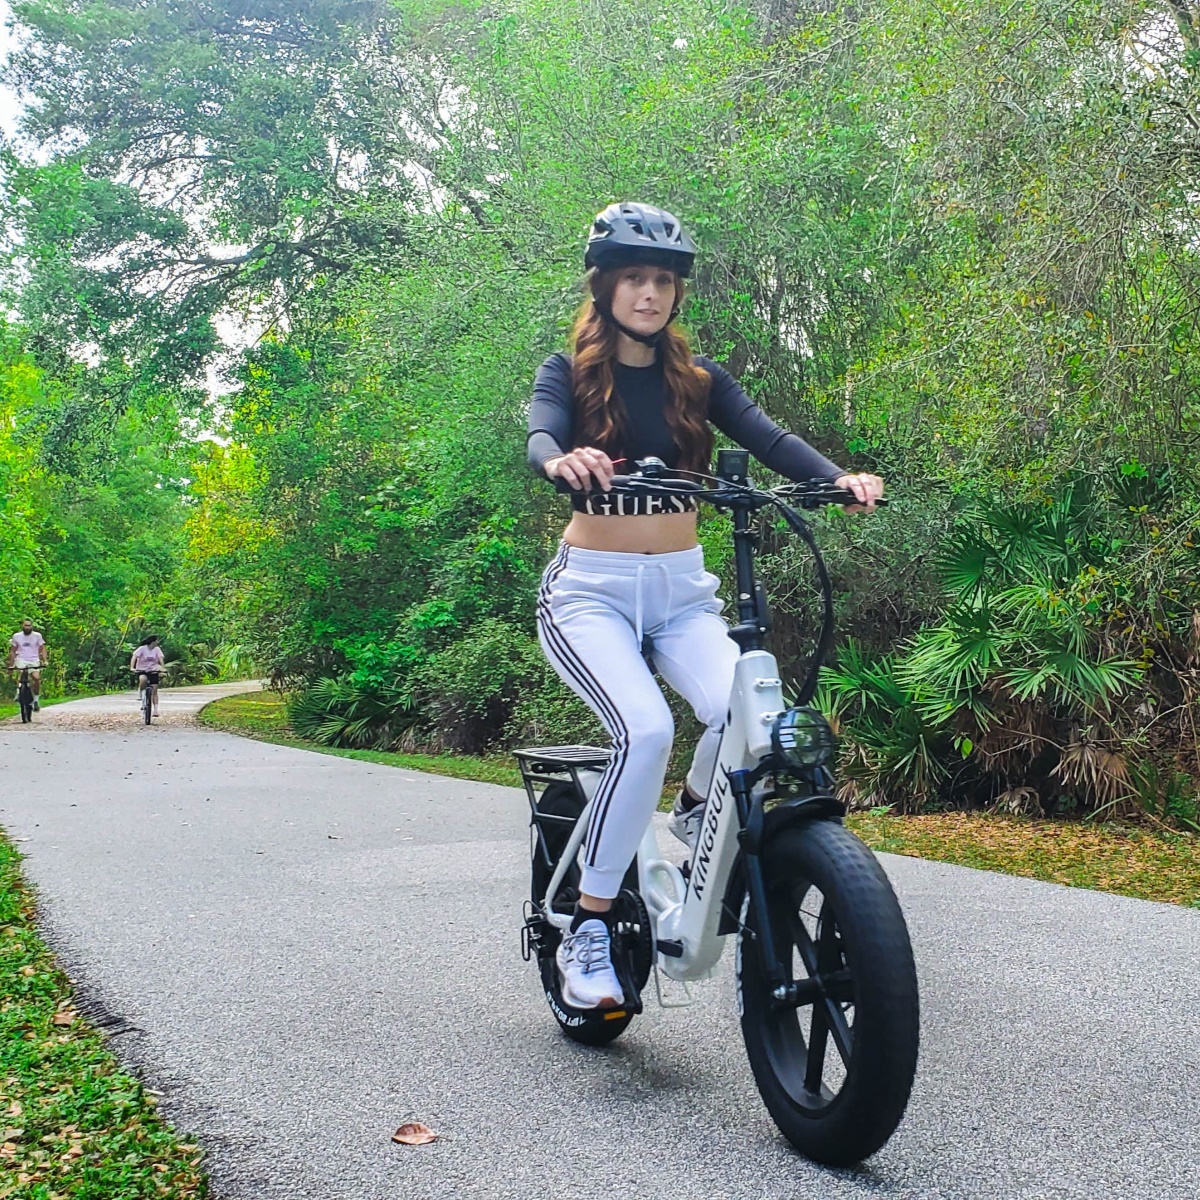 'Cruising through the park with ease, KINGBULL is your perfect companion.🎉🚴
📷@ZophieReviews
🛒🔗For More 👉 kingbullbike.com
#kingbull #ElectricBike #ebike #smartebike #adventurebike #ridebikes #ebikestyle #ridebikesbehappy #adventurebikeriders #whythebike #ebikelover